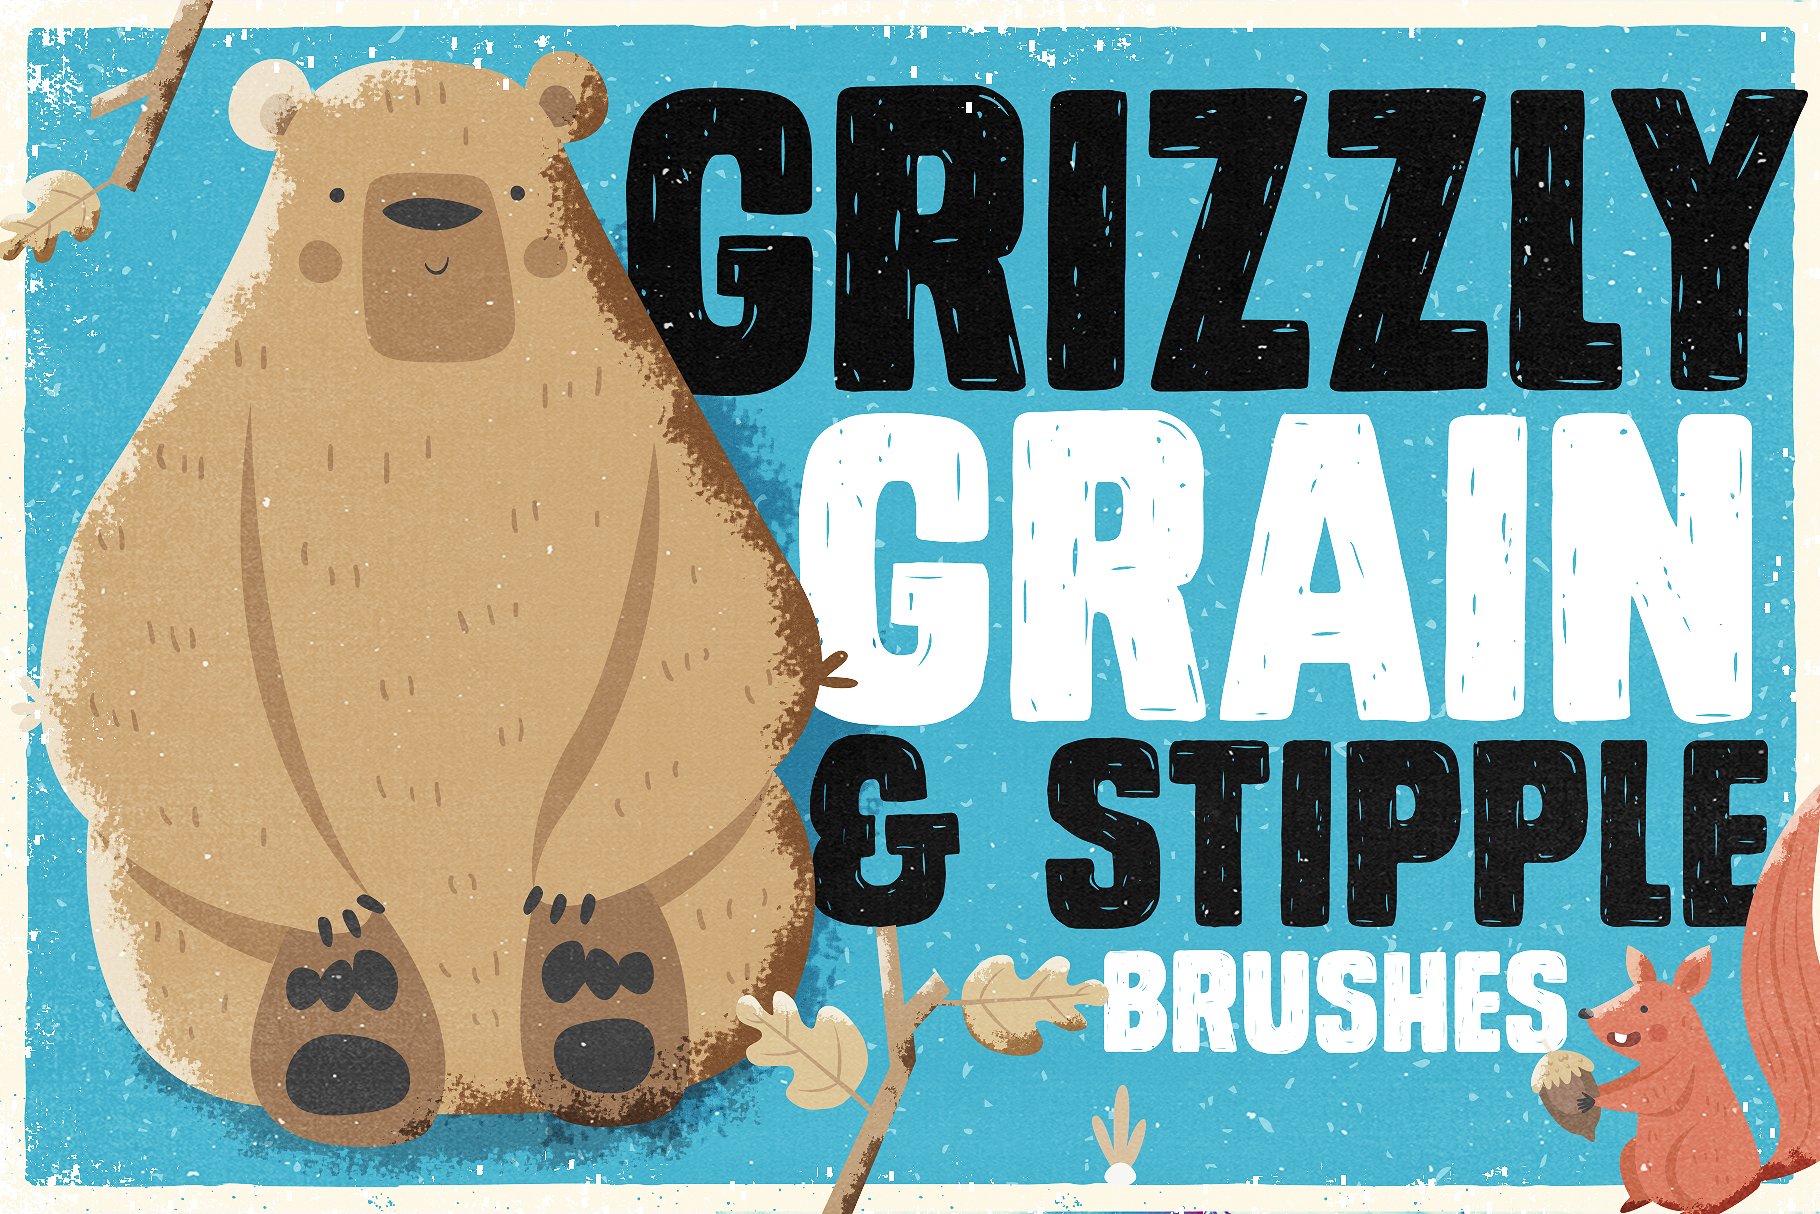 Grizzly Grain & Stipple Brushescover image.